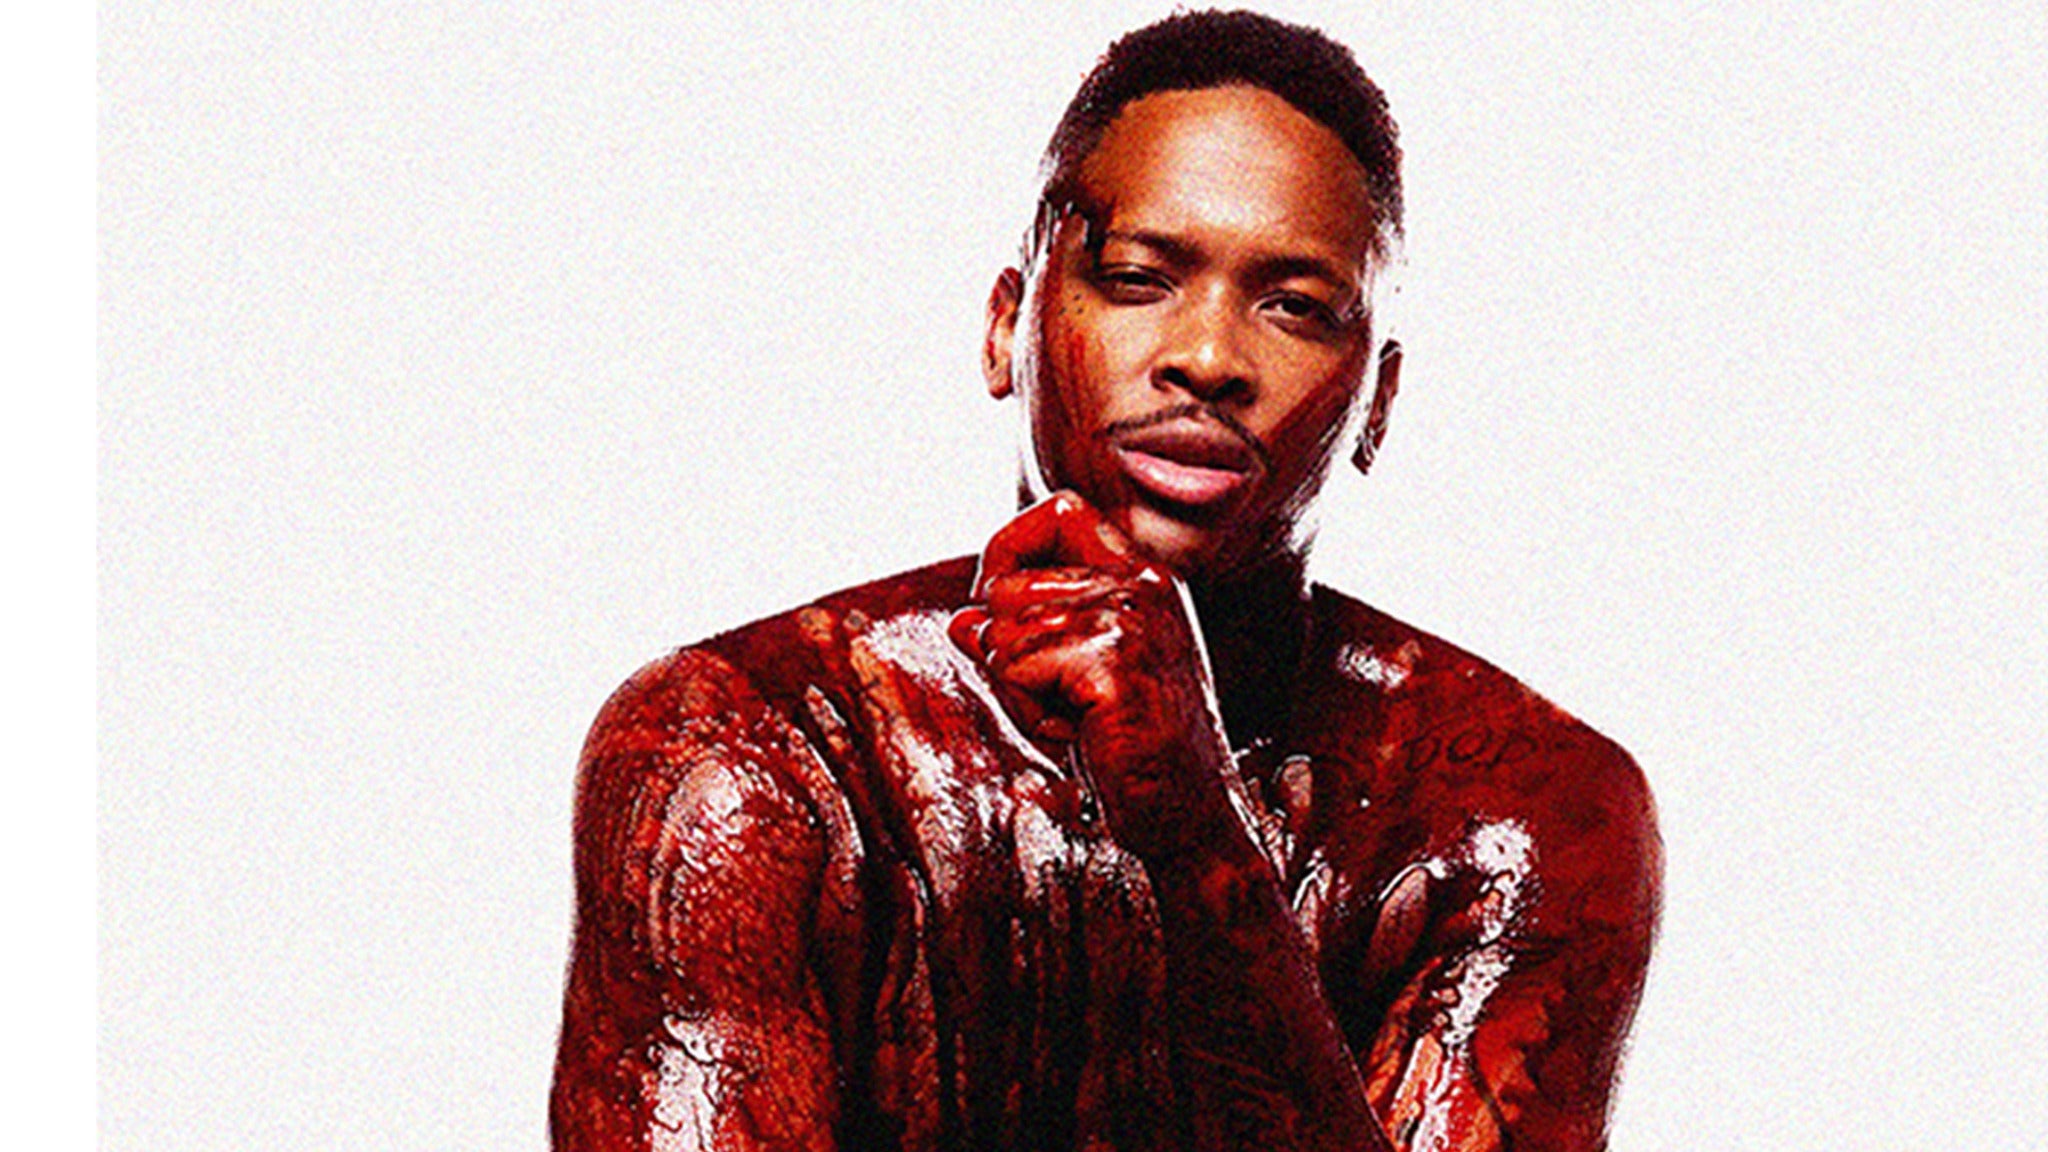 The Bounce Back - YG in Stockton promo photo for Black Friday / Cyber Monday  presale offer code